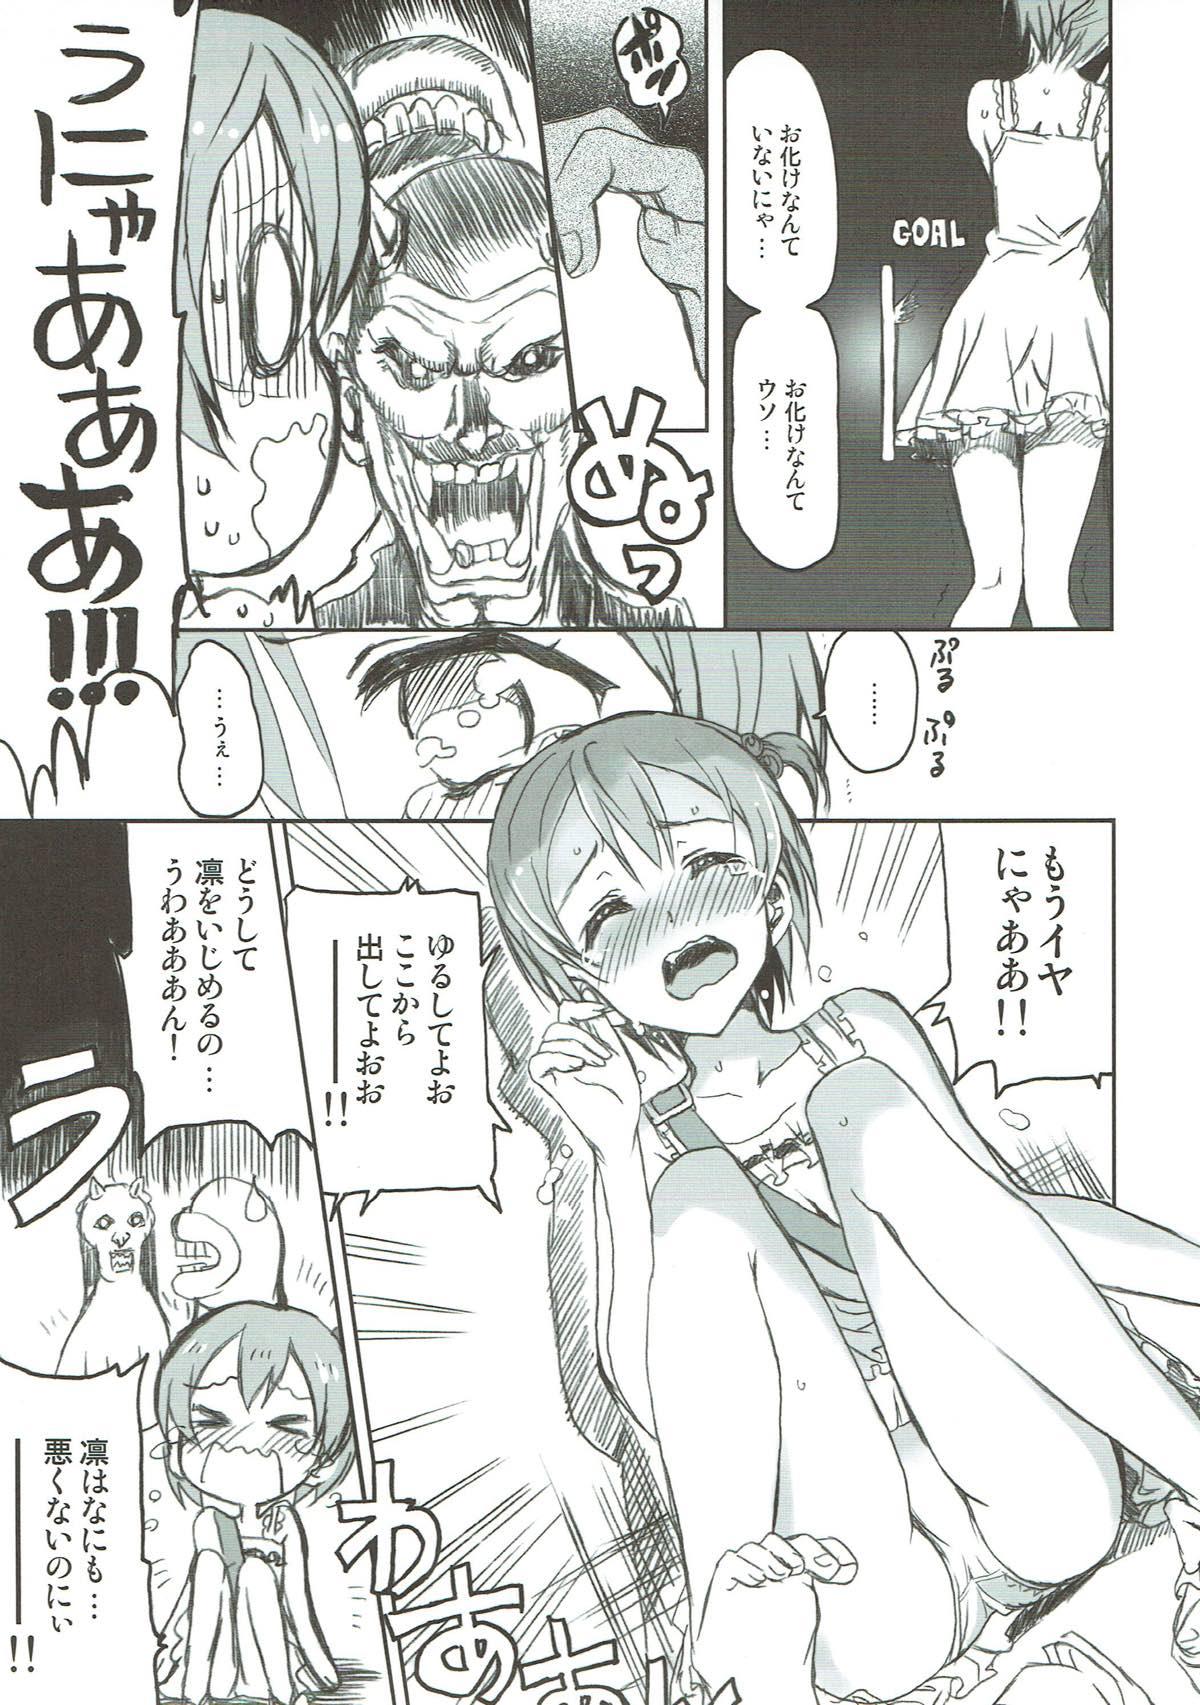 Audition Hoshisora Kanojo. - Love live Lolicon - Page 12